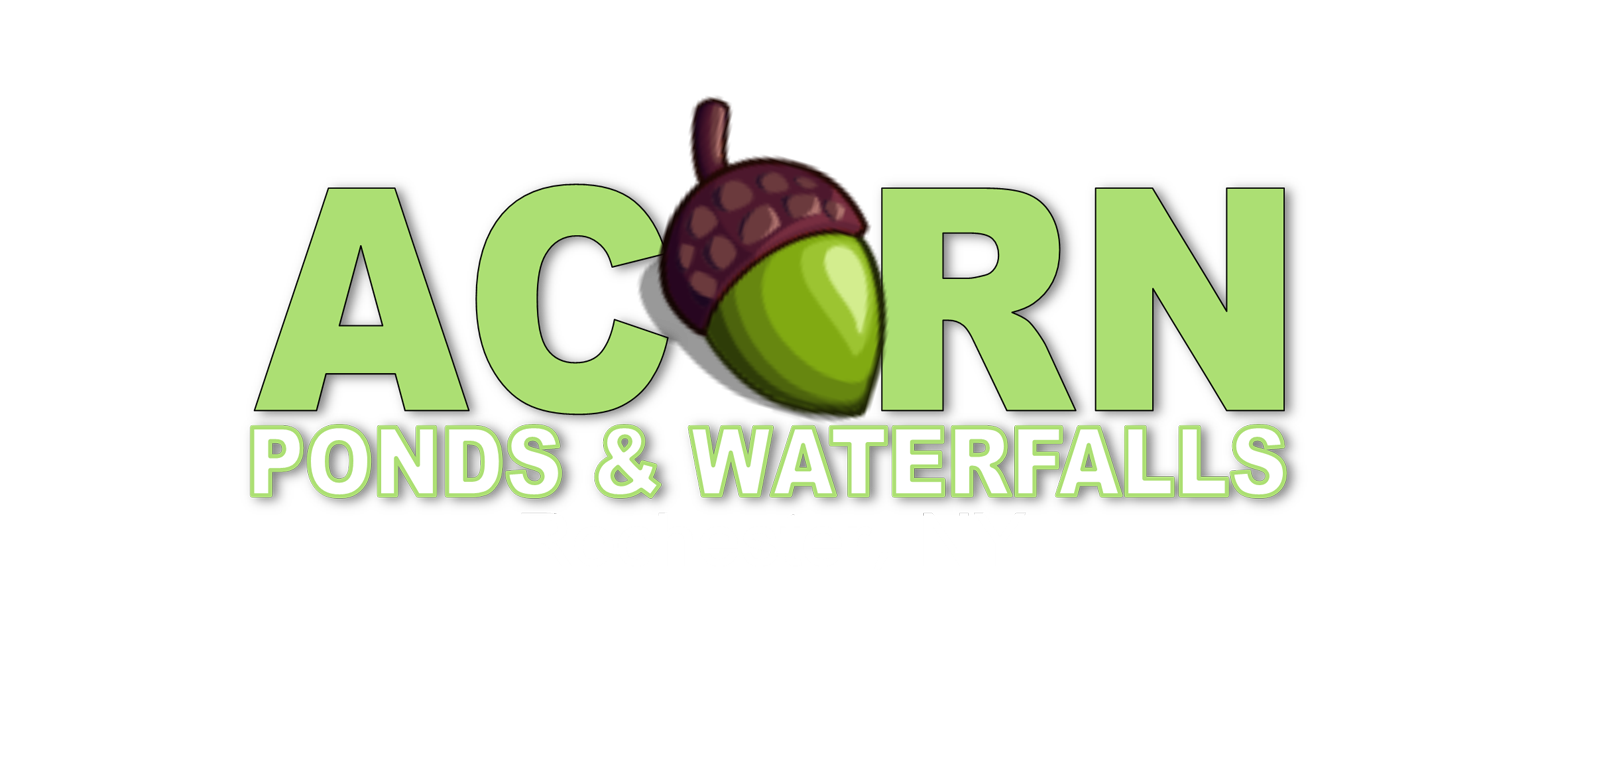 Acorn Ponds & Waterfalls Pond Skimmer - Koi Pond Services In Rochester Monroe County (NY)